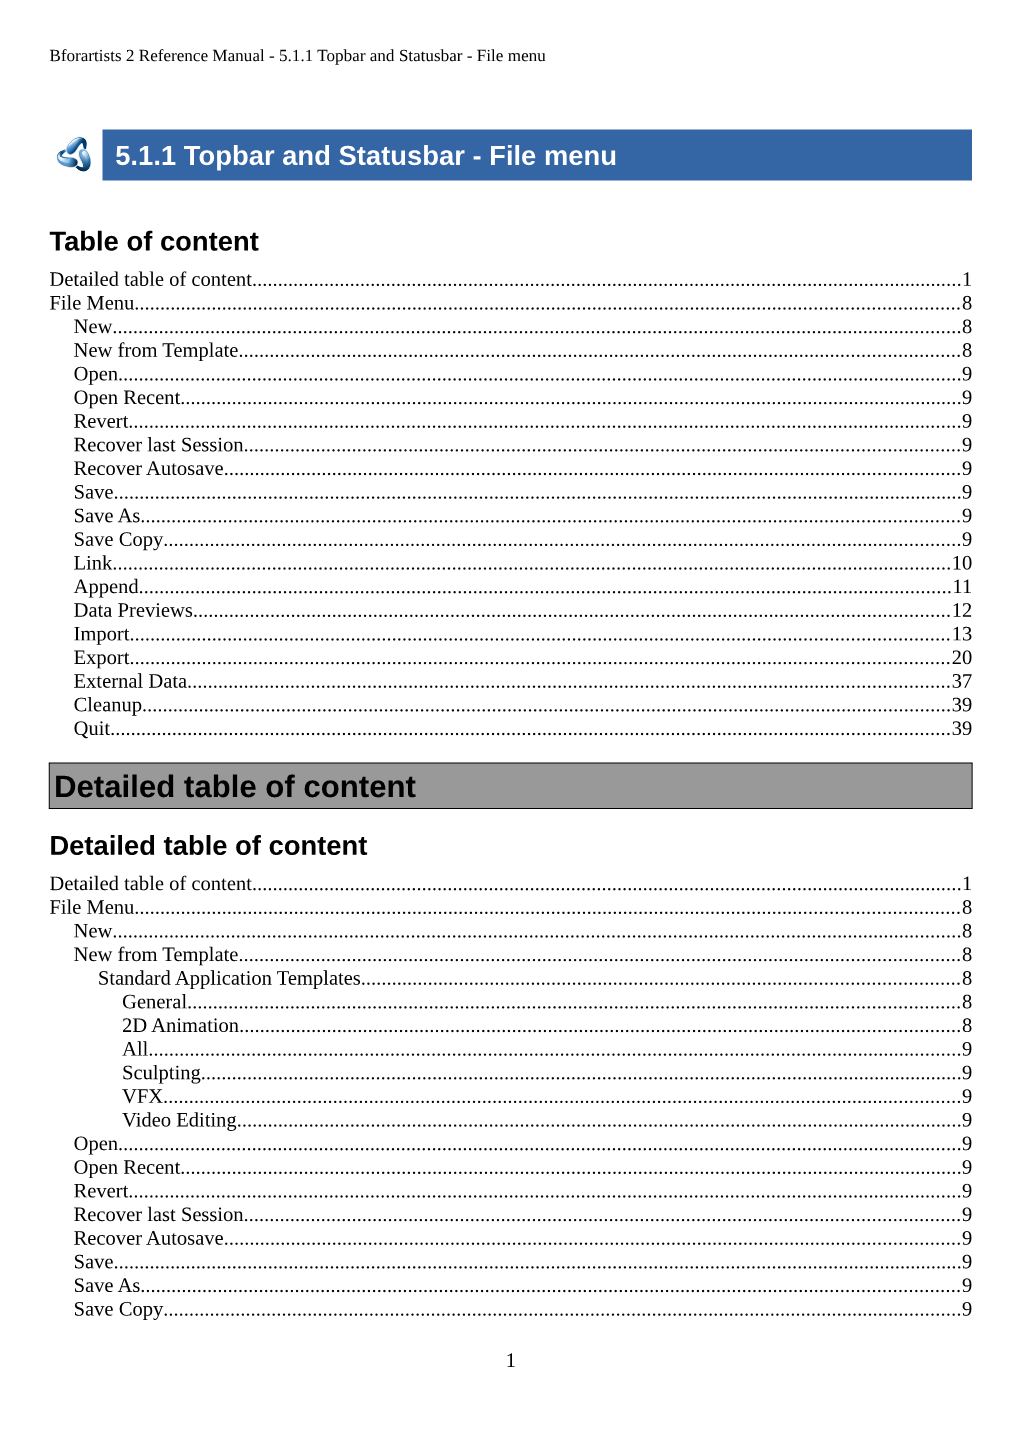 Detailed Table of Content